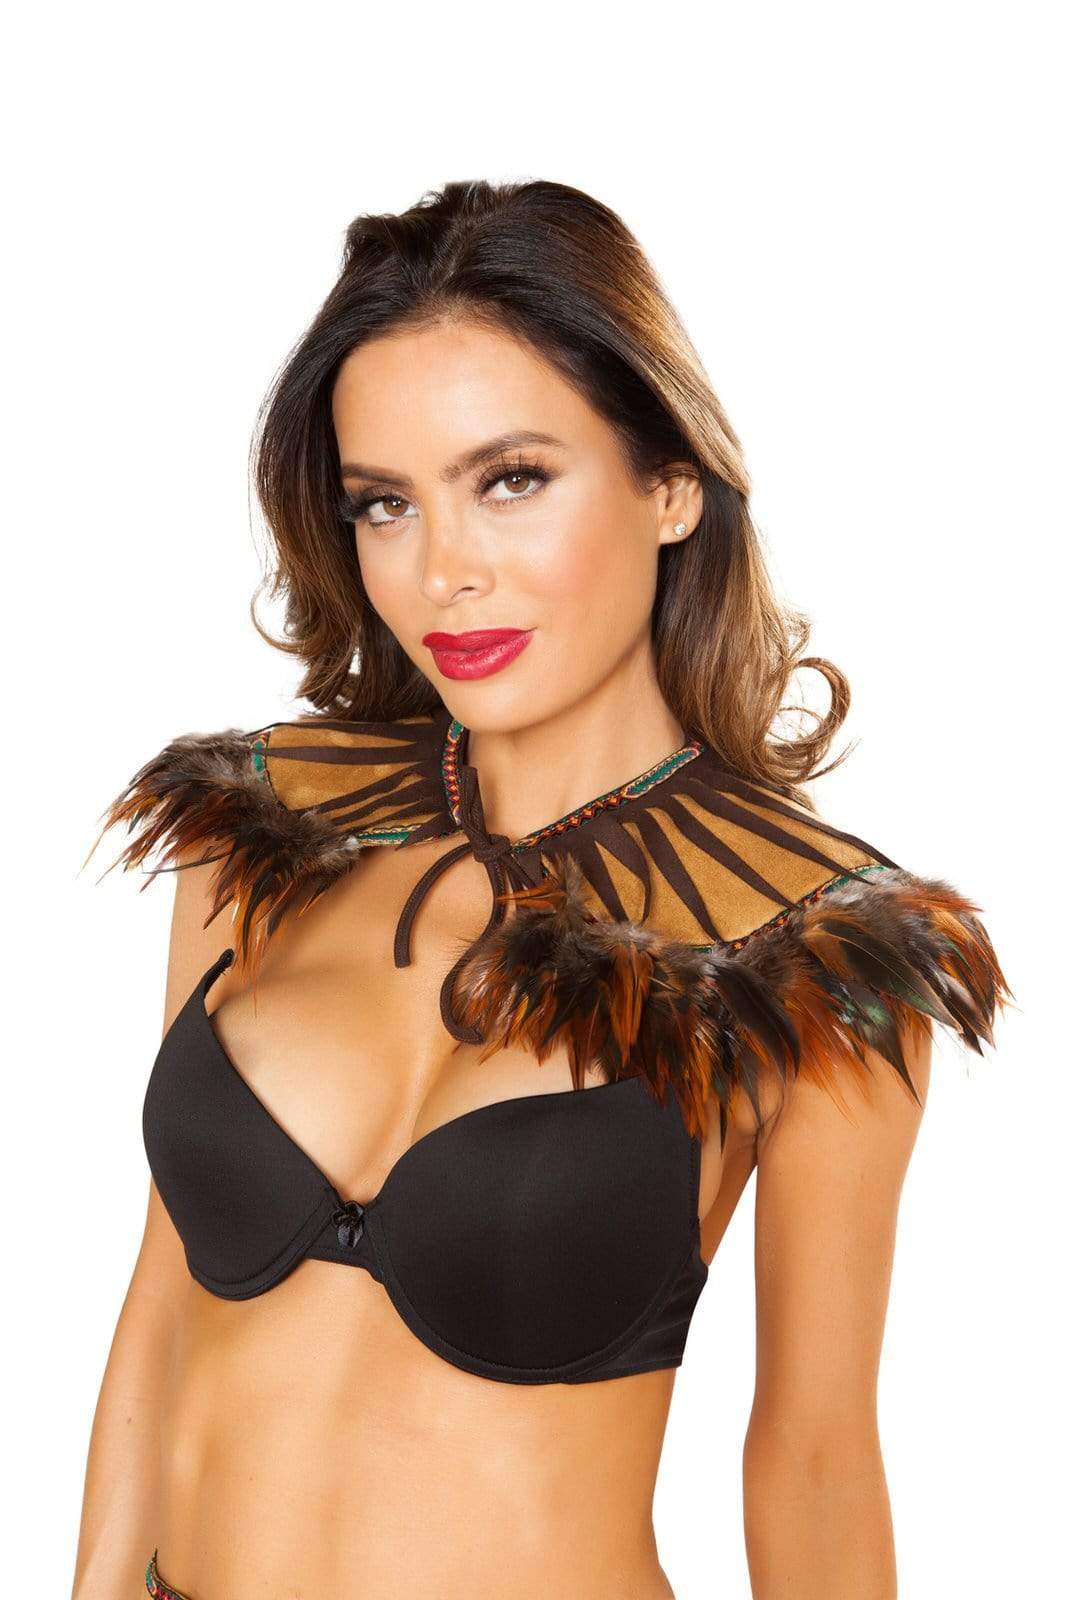 Roma One Size / Brown Native Indian Style Feather Neck Piece Costume Accessory SHC-NEC10118-OS-R Apparel & Accessories > Costumes & Accessories > Costumes